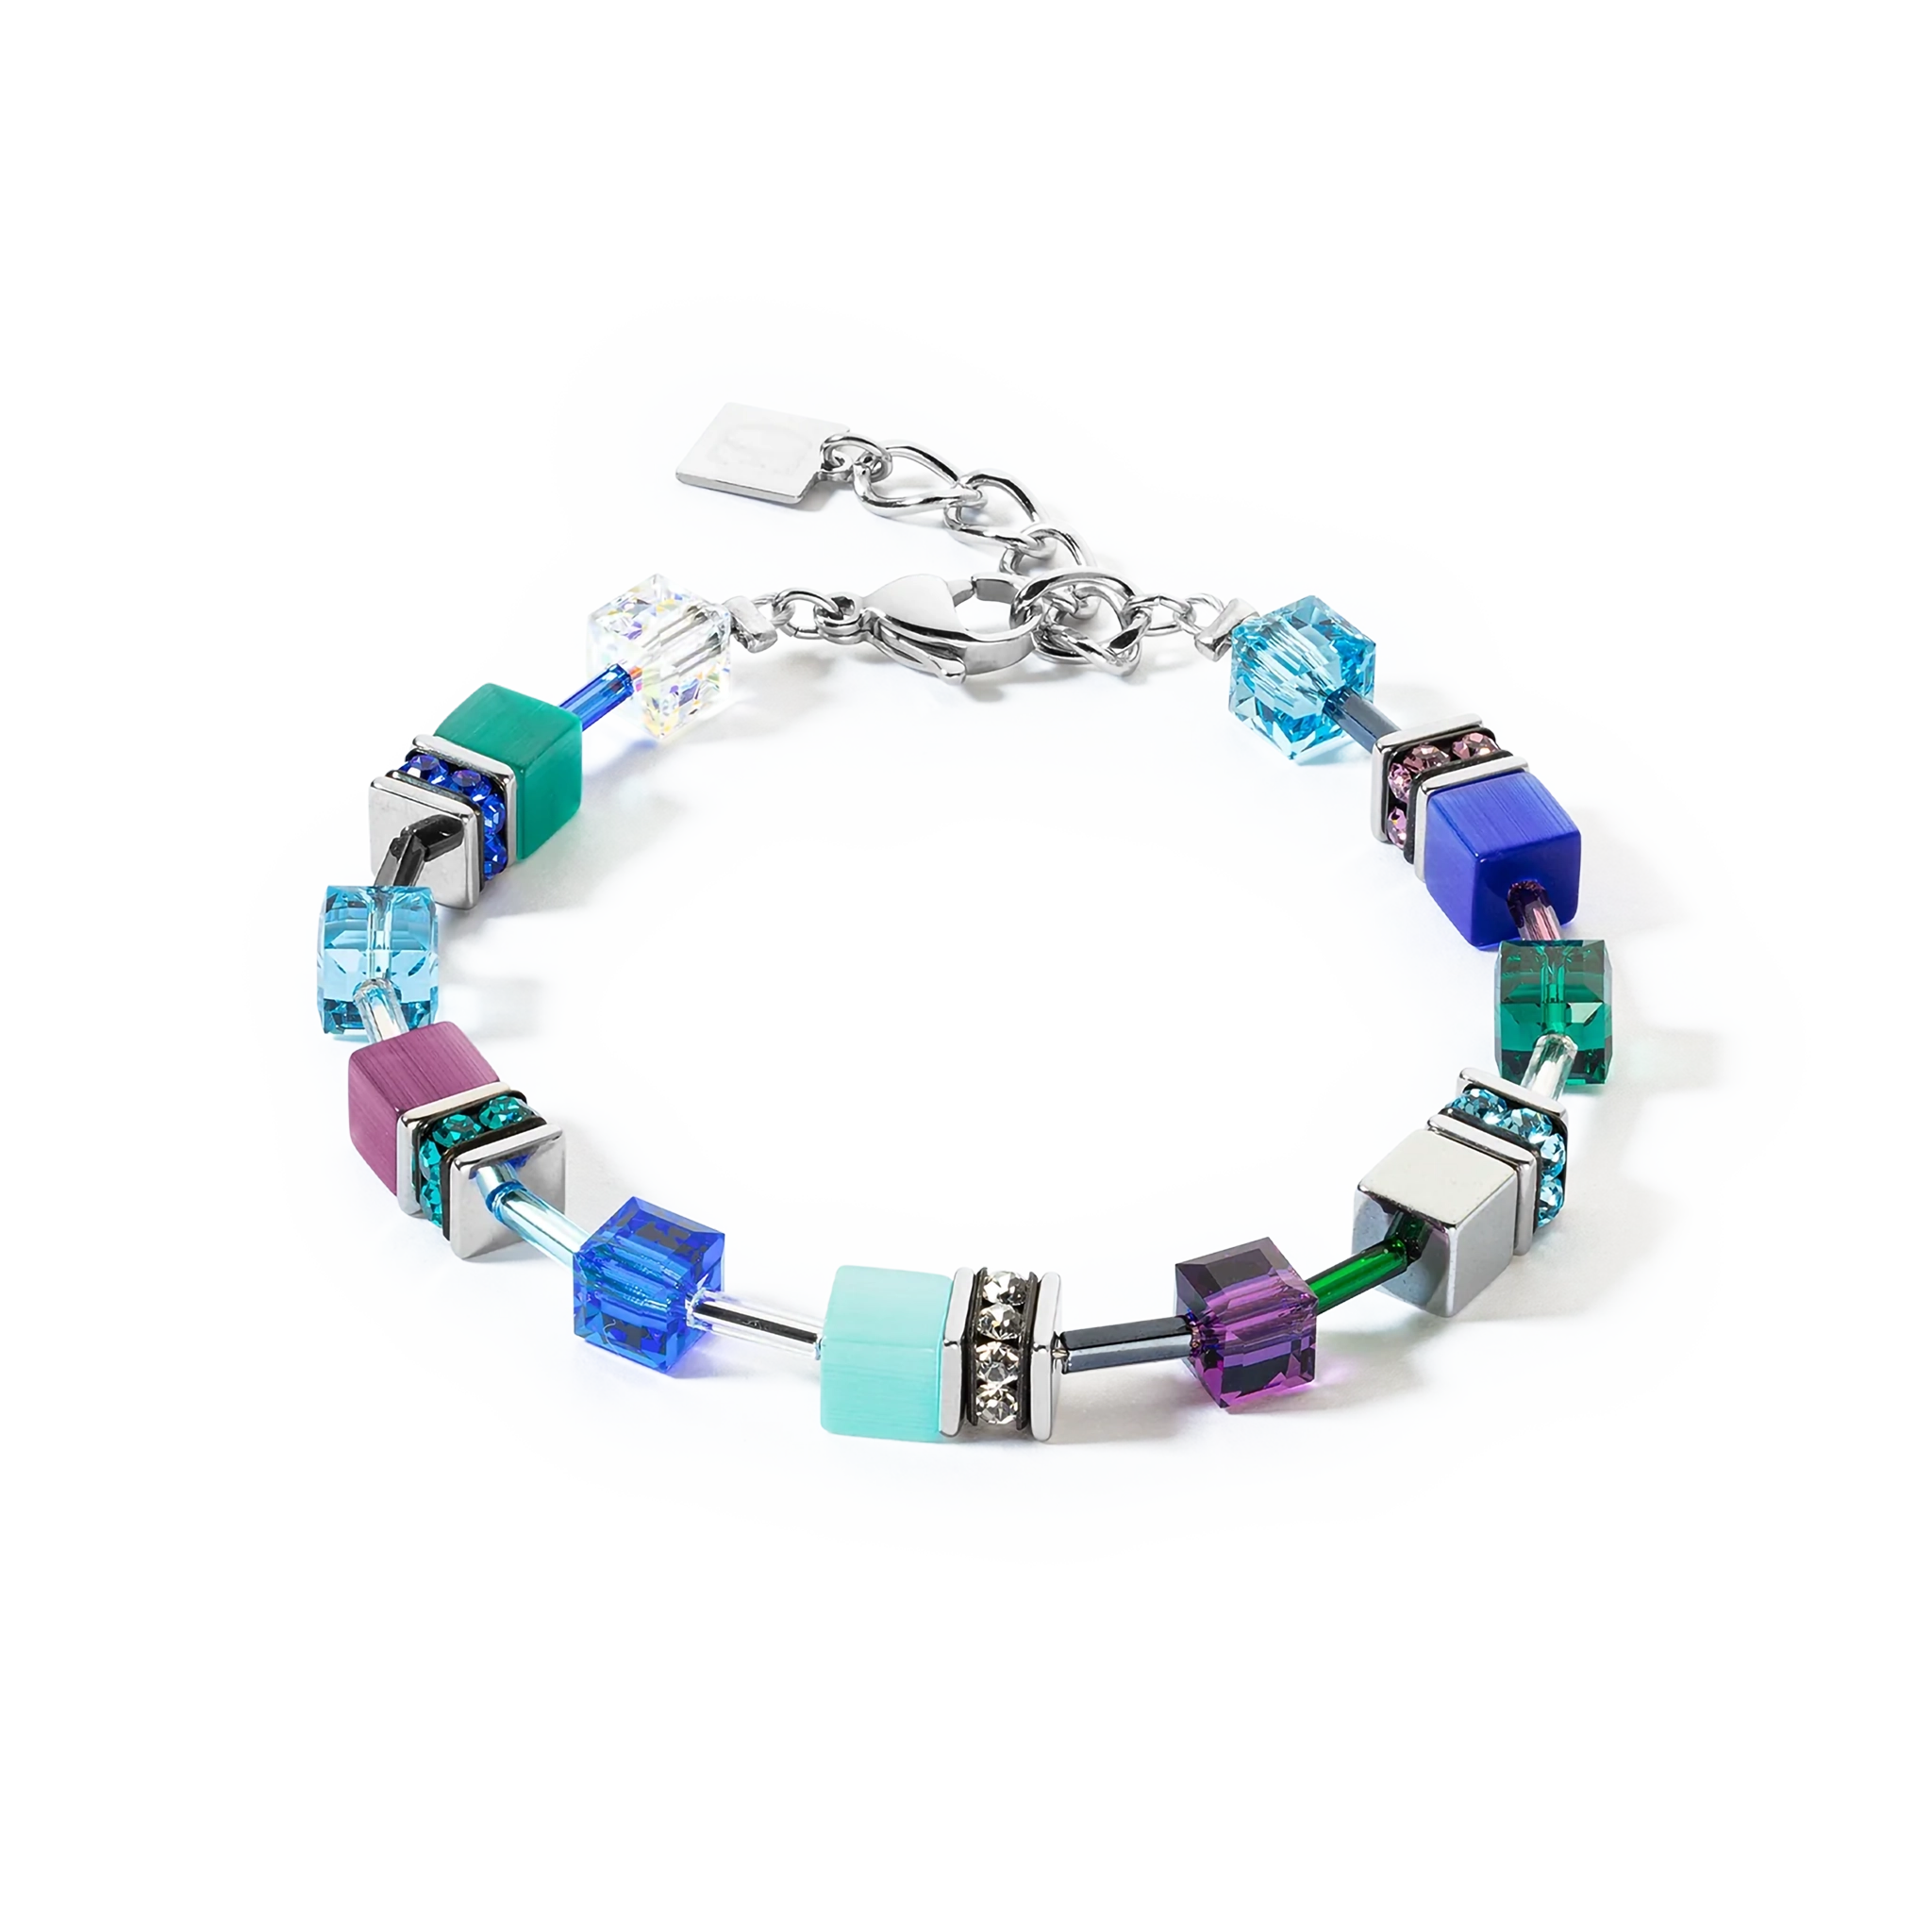 A steel bracelet featuring a variety of cube shaped stones in blue and purple